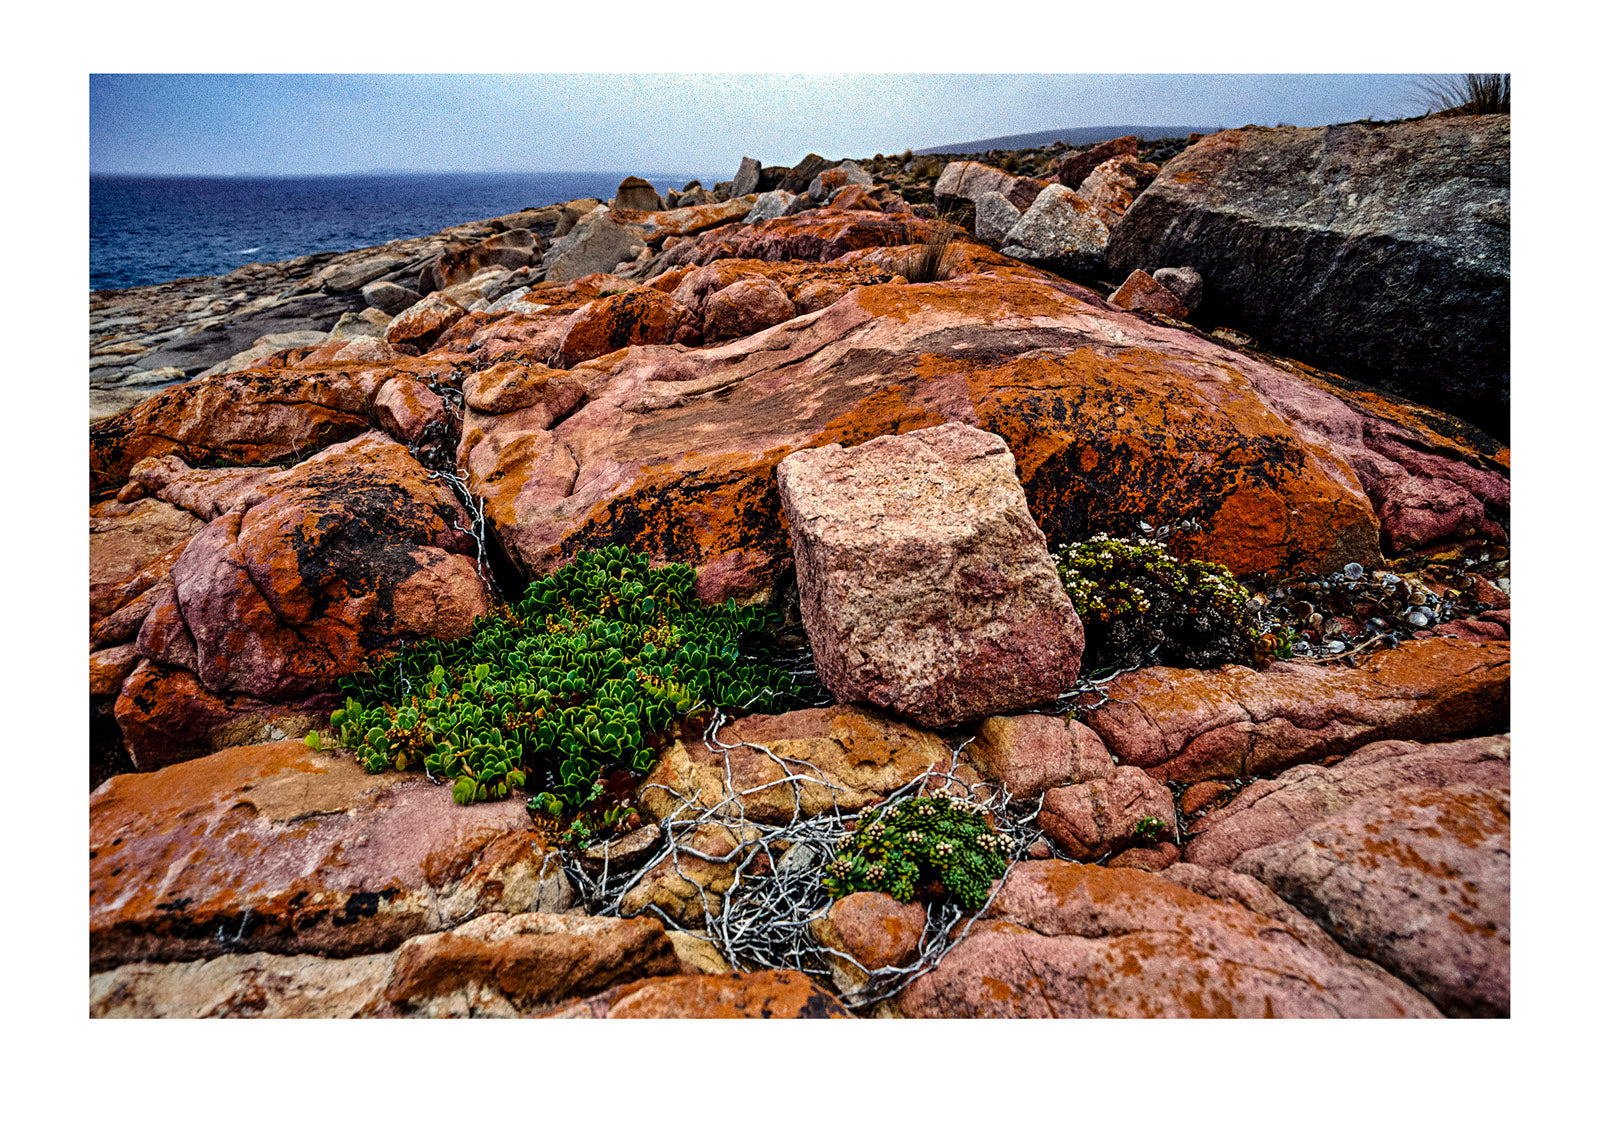 Pink granite boulders cluster on a stormy, windswept coastline. Lincoln National Park, Memory Cove Wilderness Protection Area, South Australia, Australia.